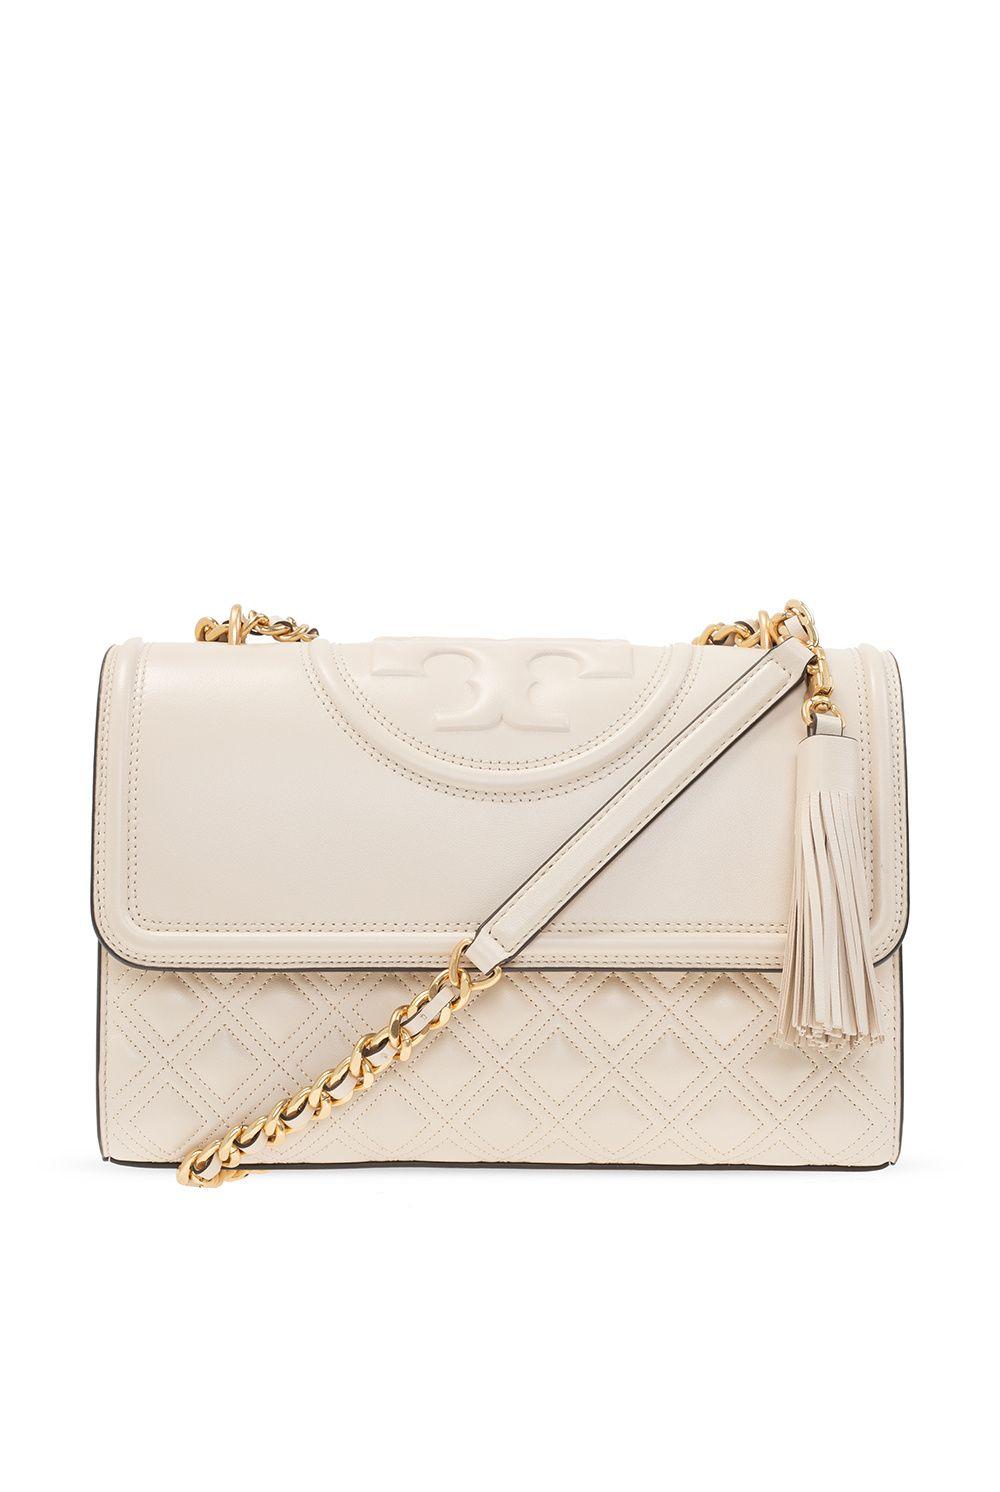 Tory Burch Fleming Convertible Shoulder Bag In Beige New Cream Leather in  Natural